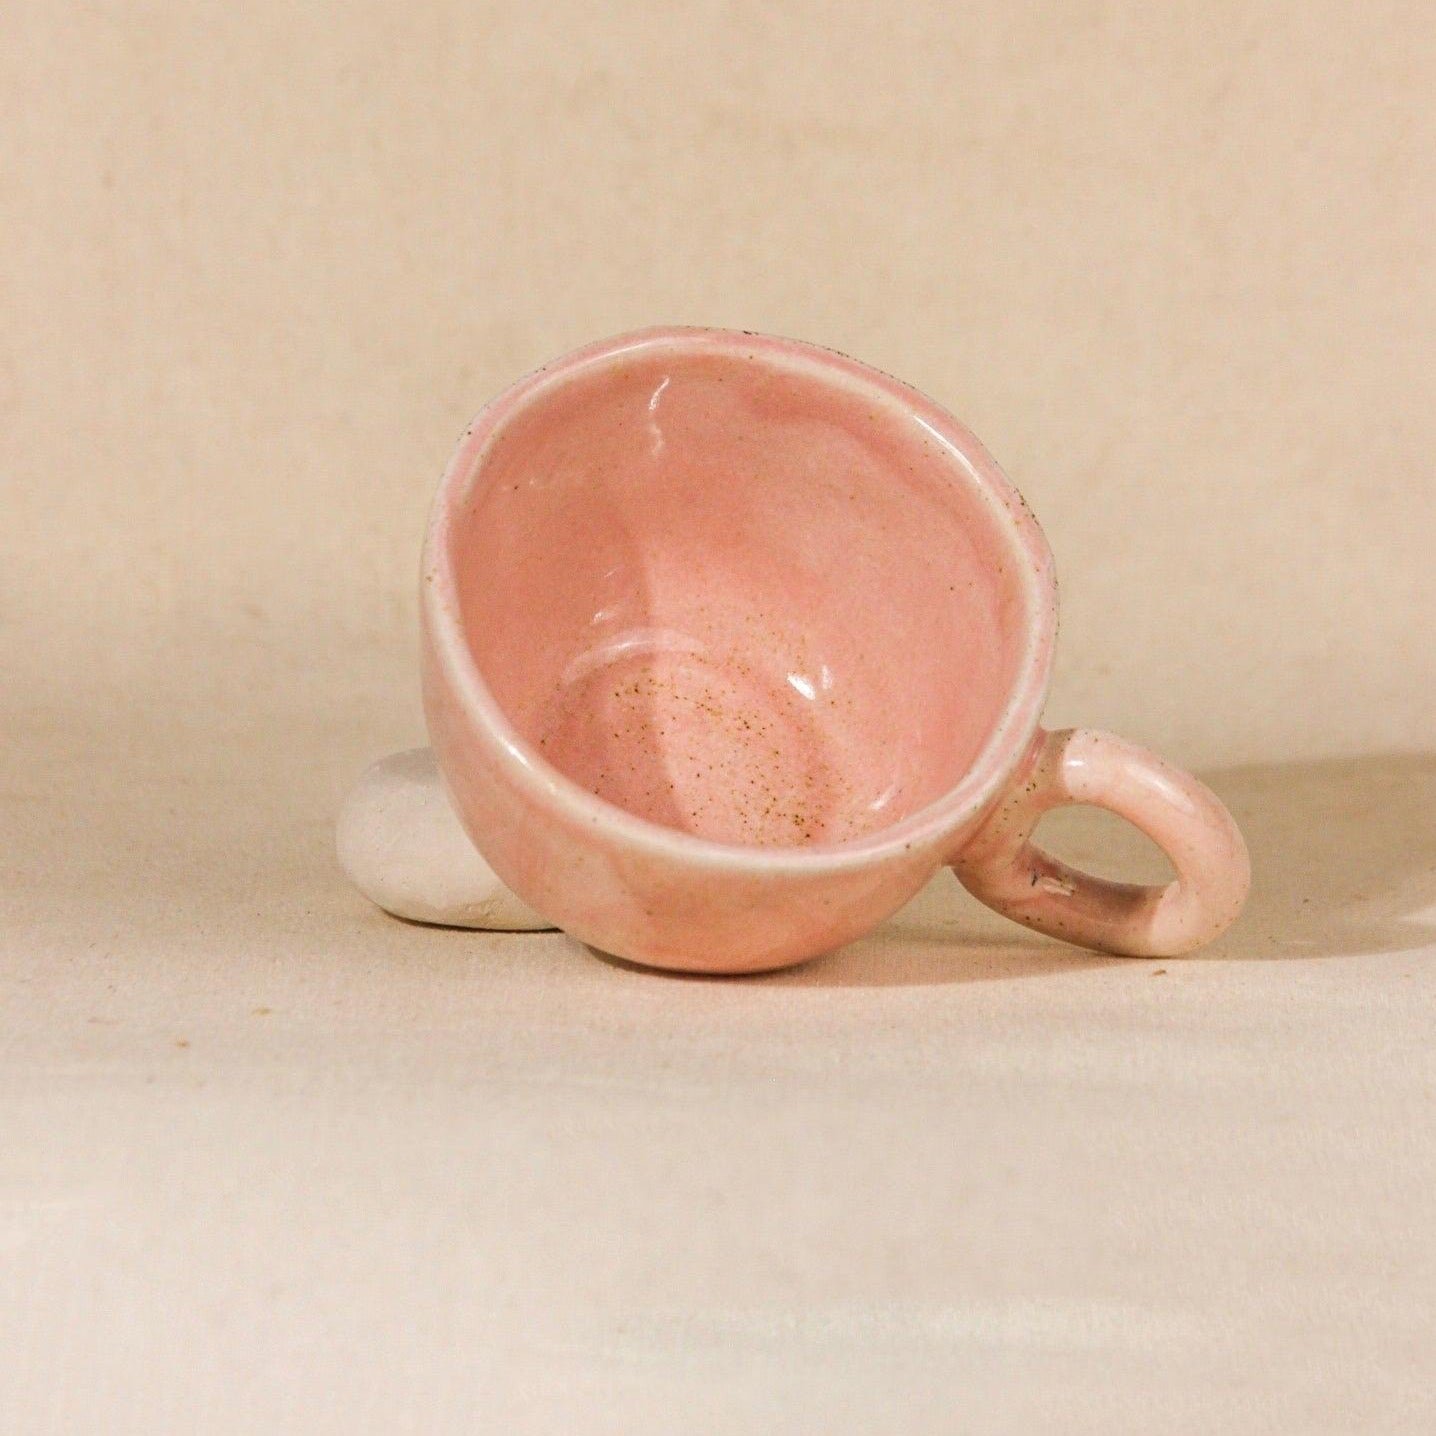 The Sage Face Ceramic Cappuccino Mug in Pink color- THE ORBY HOUSE